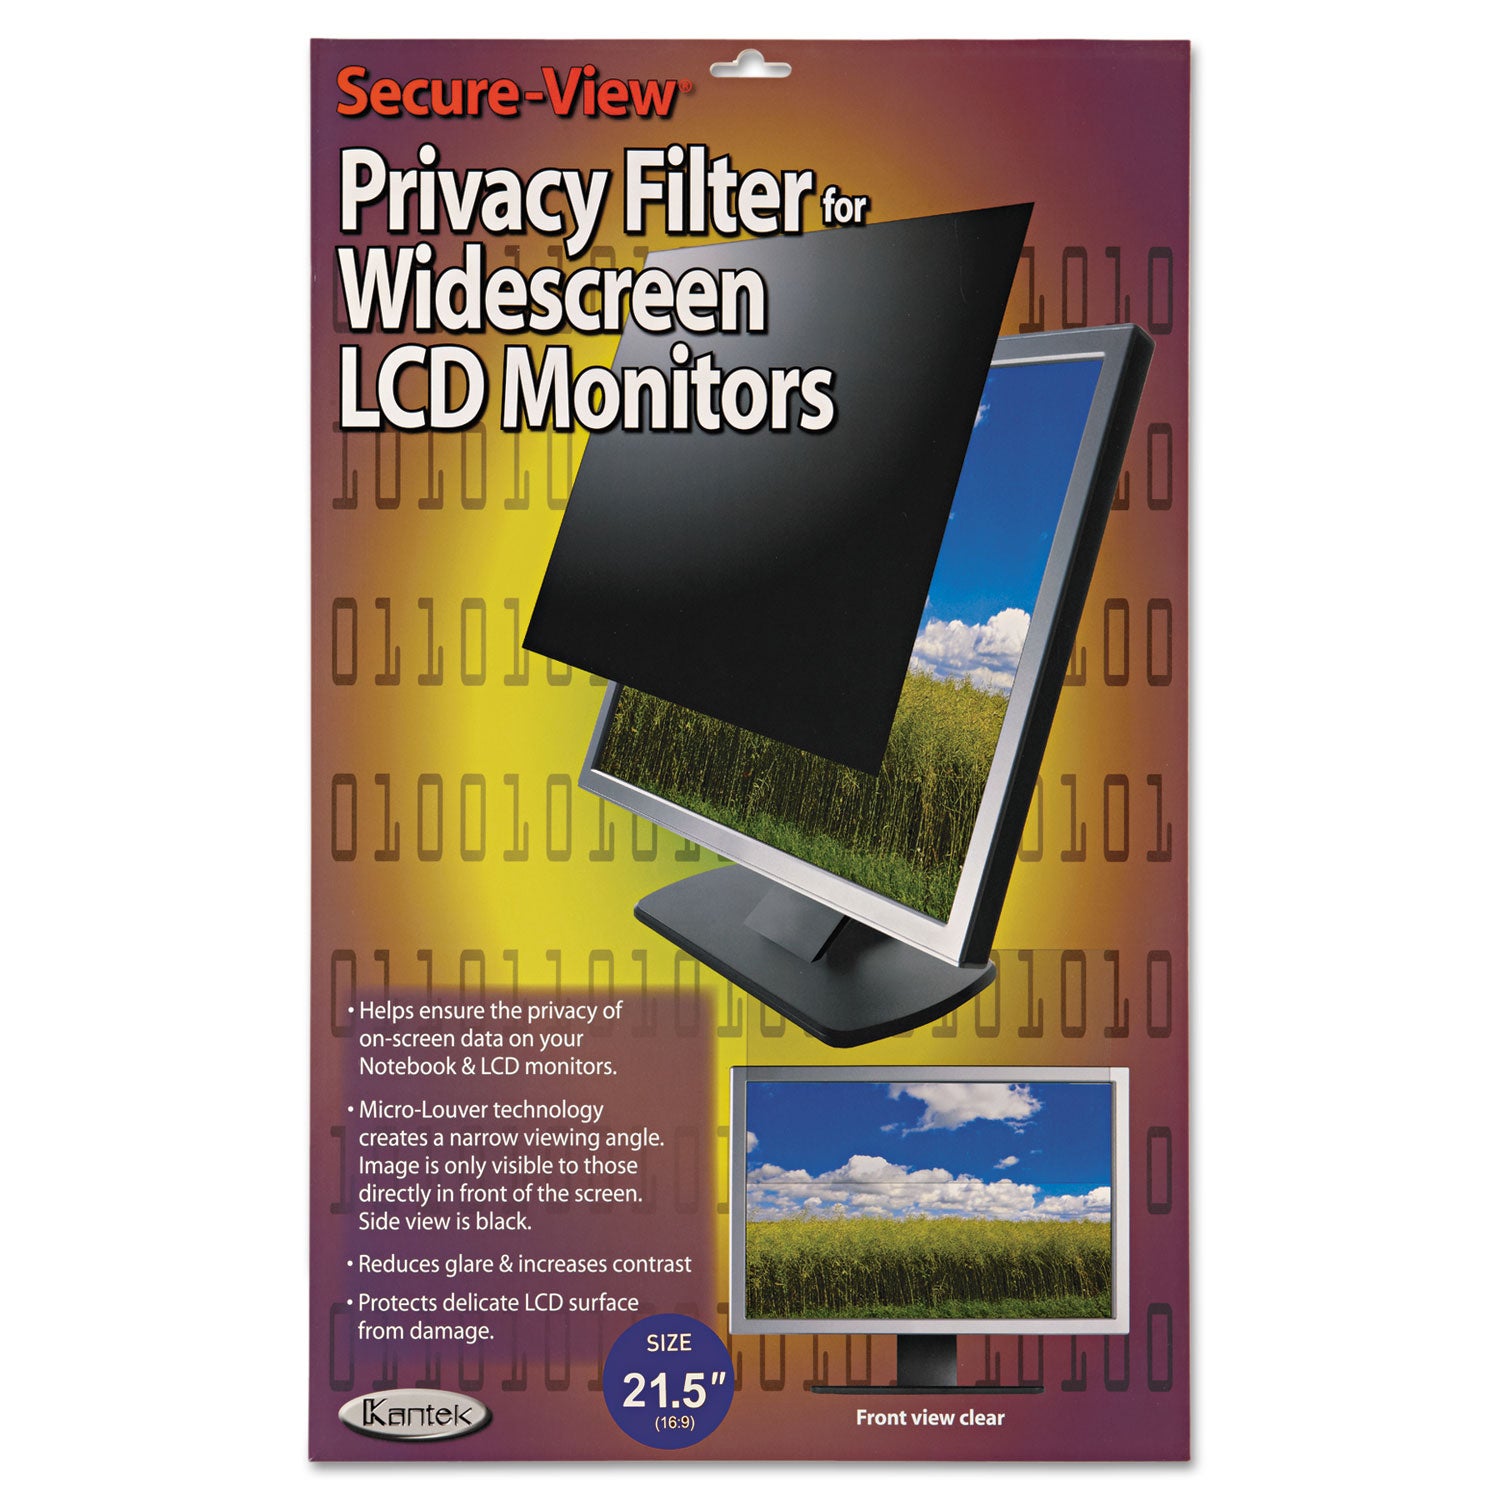 Secure View LCD Monitor Privacy Filter for 21.5" Widescreen Flat Panel Monitor, 16:9 Aspect Ratio - 